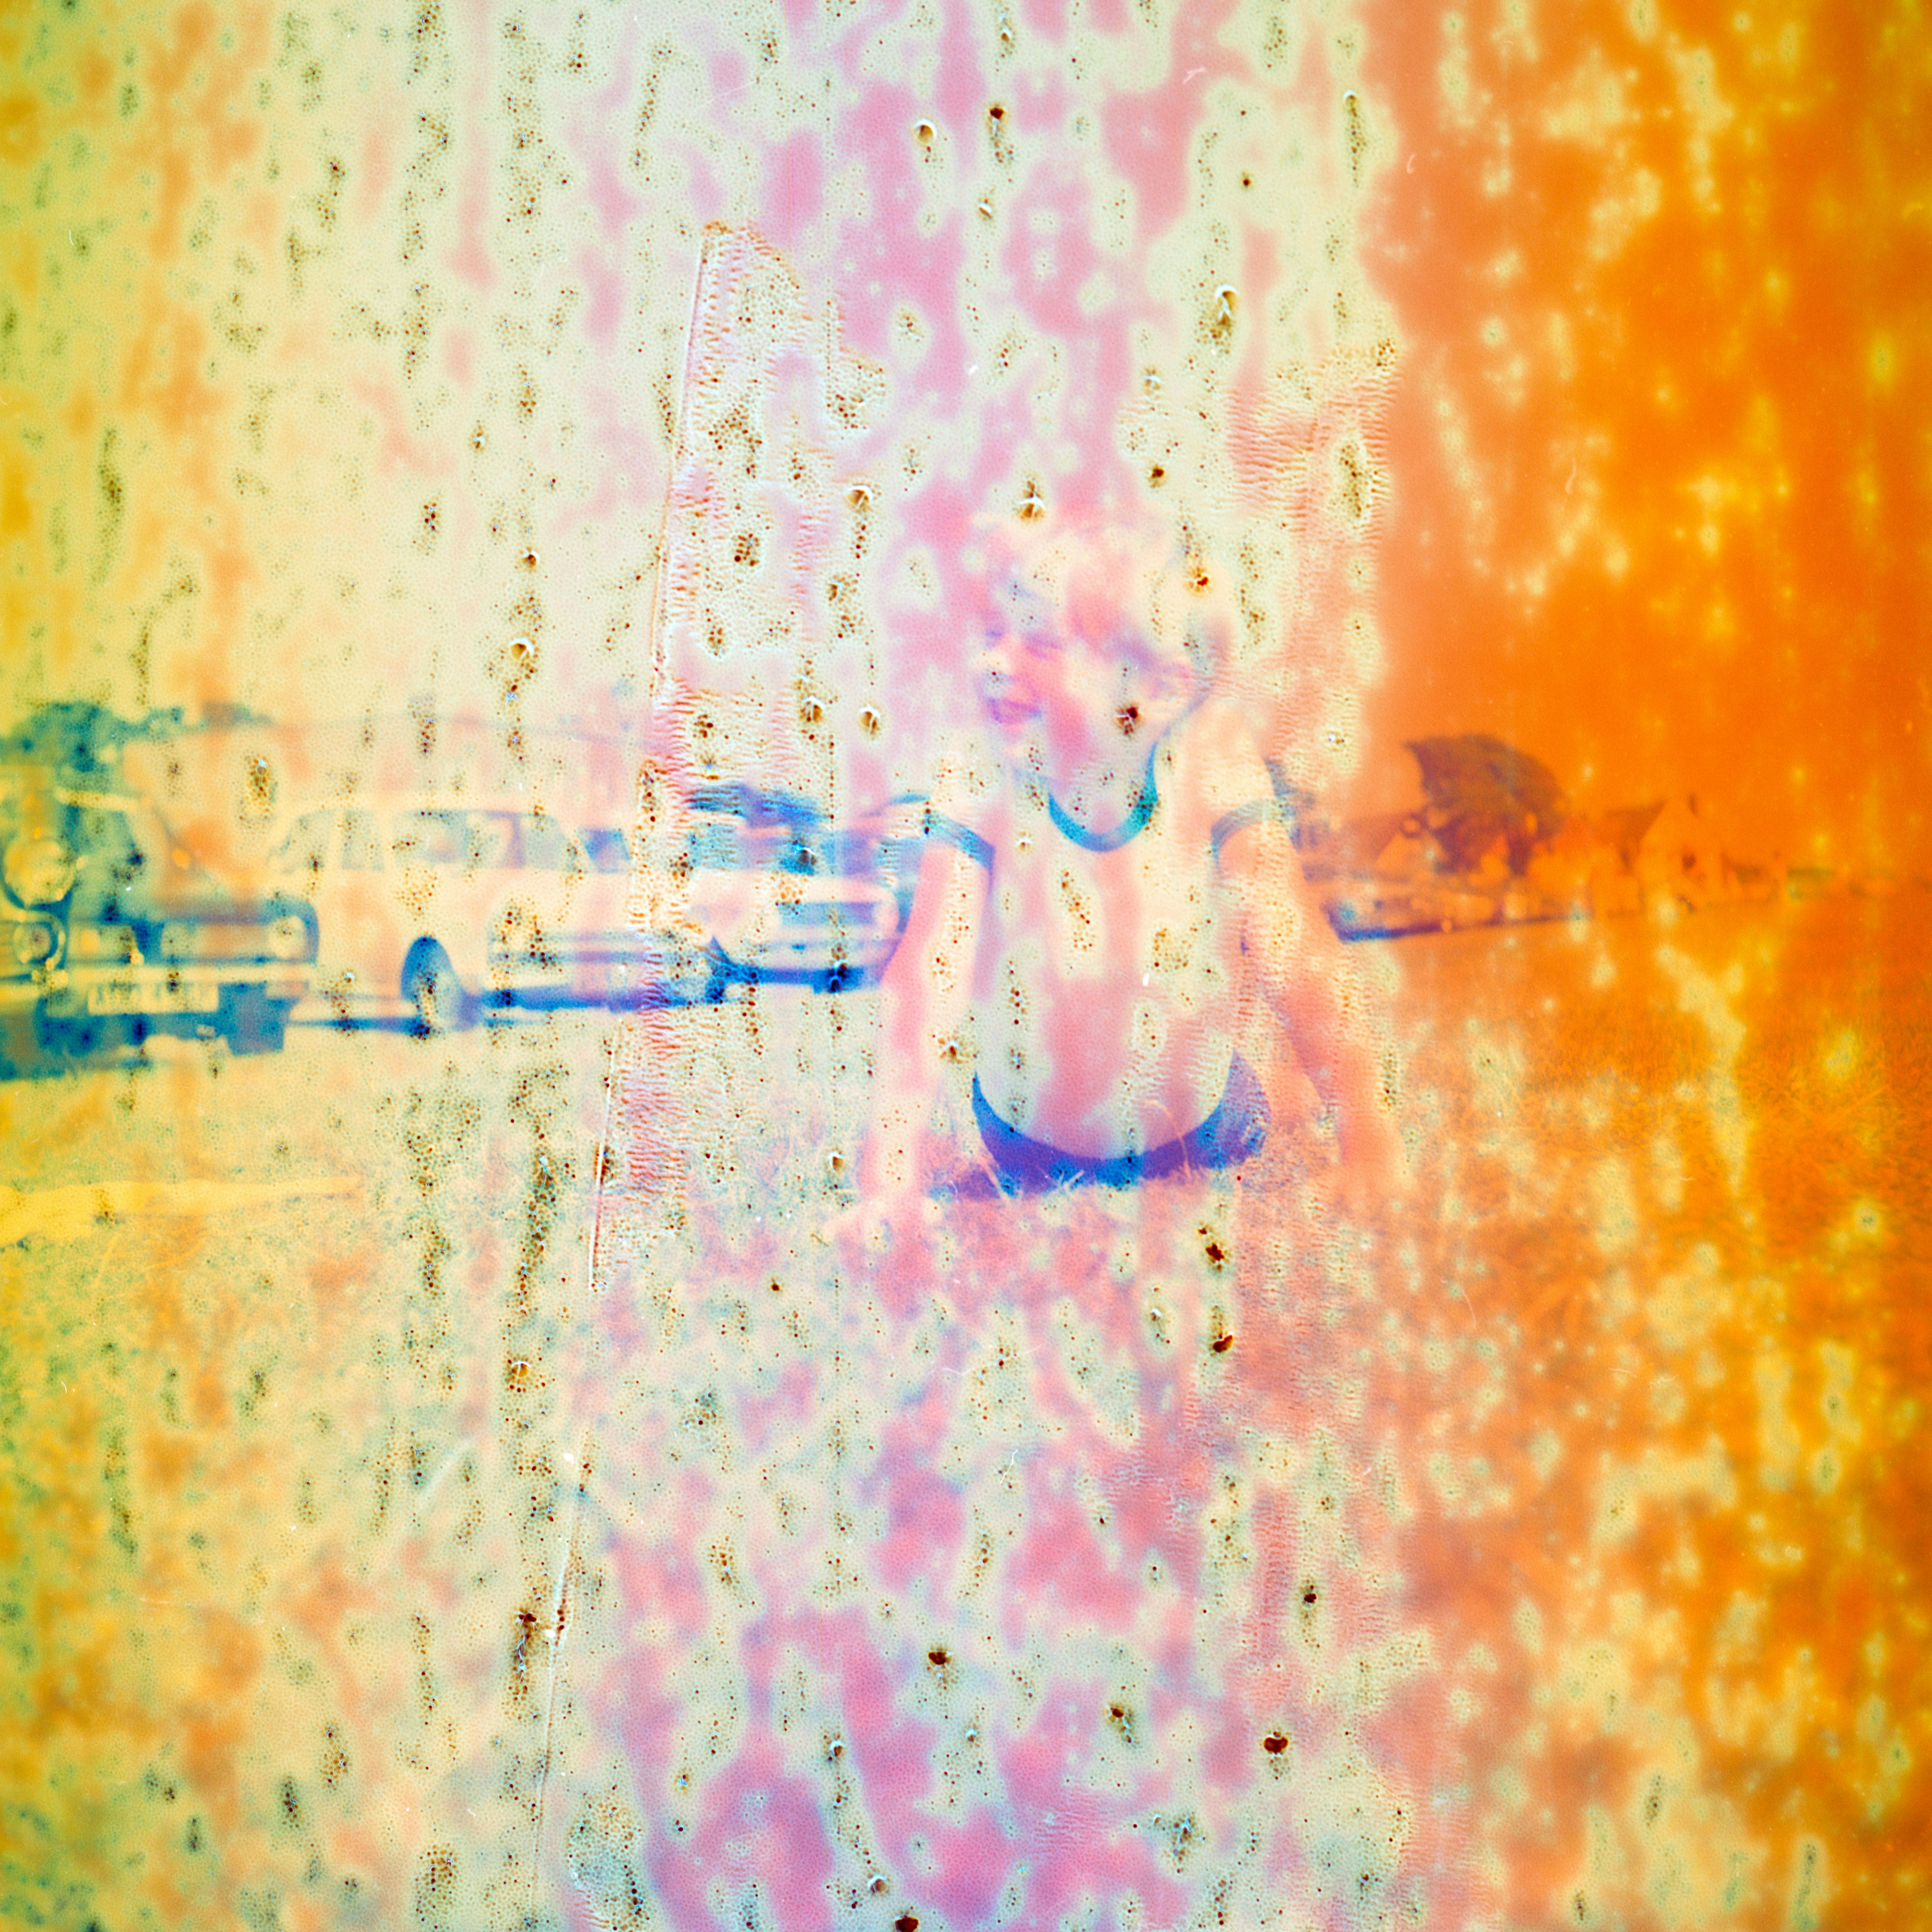 I bought a roll of unexposed film that expired in 1974 on eBay, but when it came it turned out the roll was already exposed!
So I sent it off to the lovely folks at Harman Lab who took on the challenge of developing this 45 year old roll of film.
Here are the scans, completely unaltered in all their psychedelic glory. 